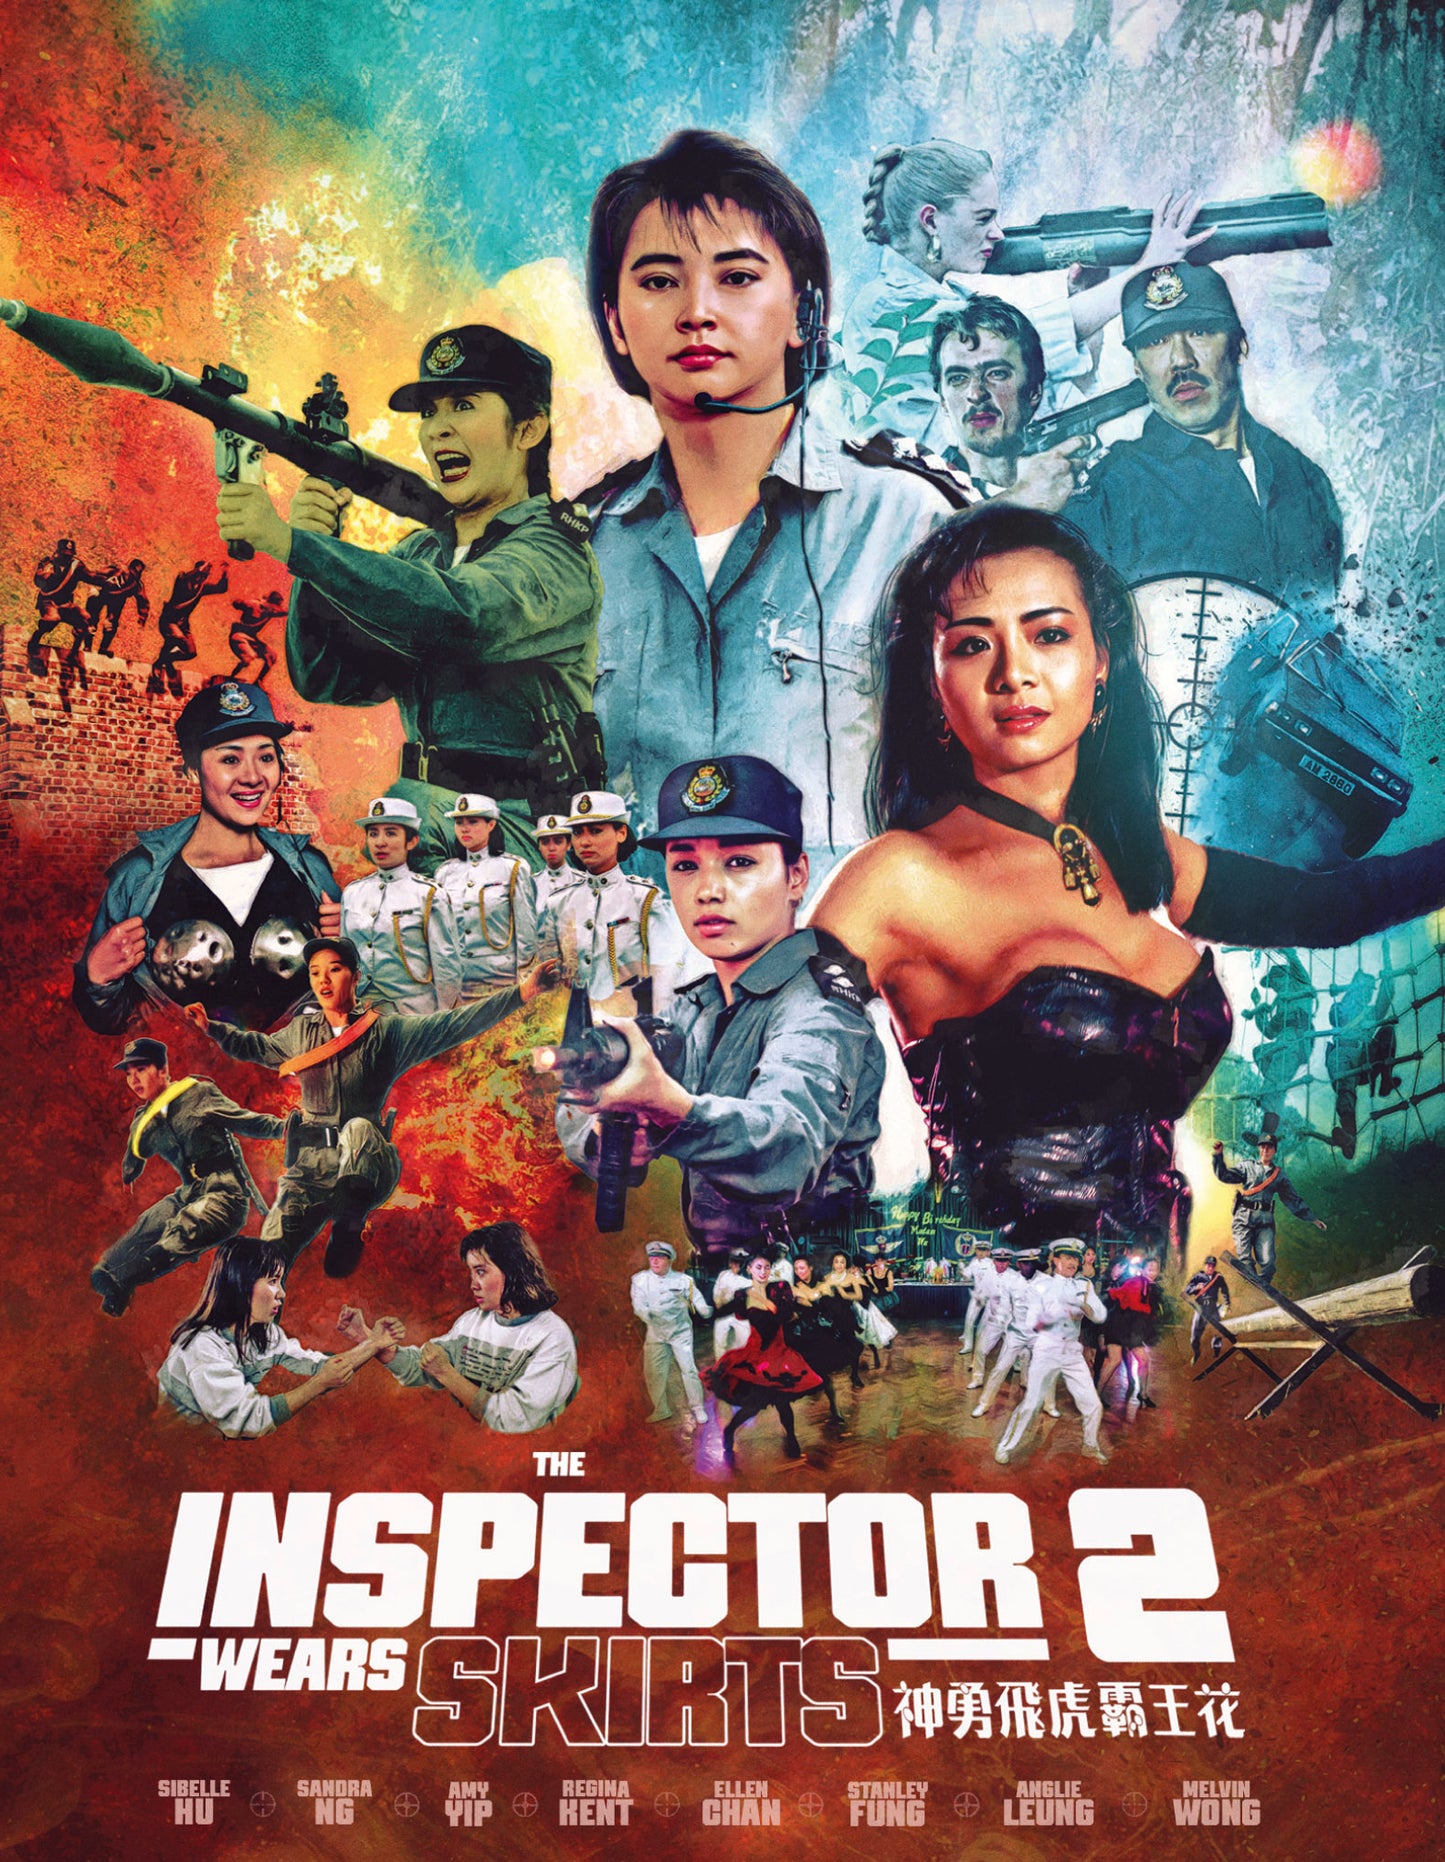 The Inspector Wears Skirts 2 Blu-ray with Slipcover (88 Films U.S.) [Preorder]